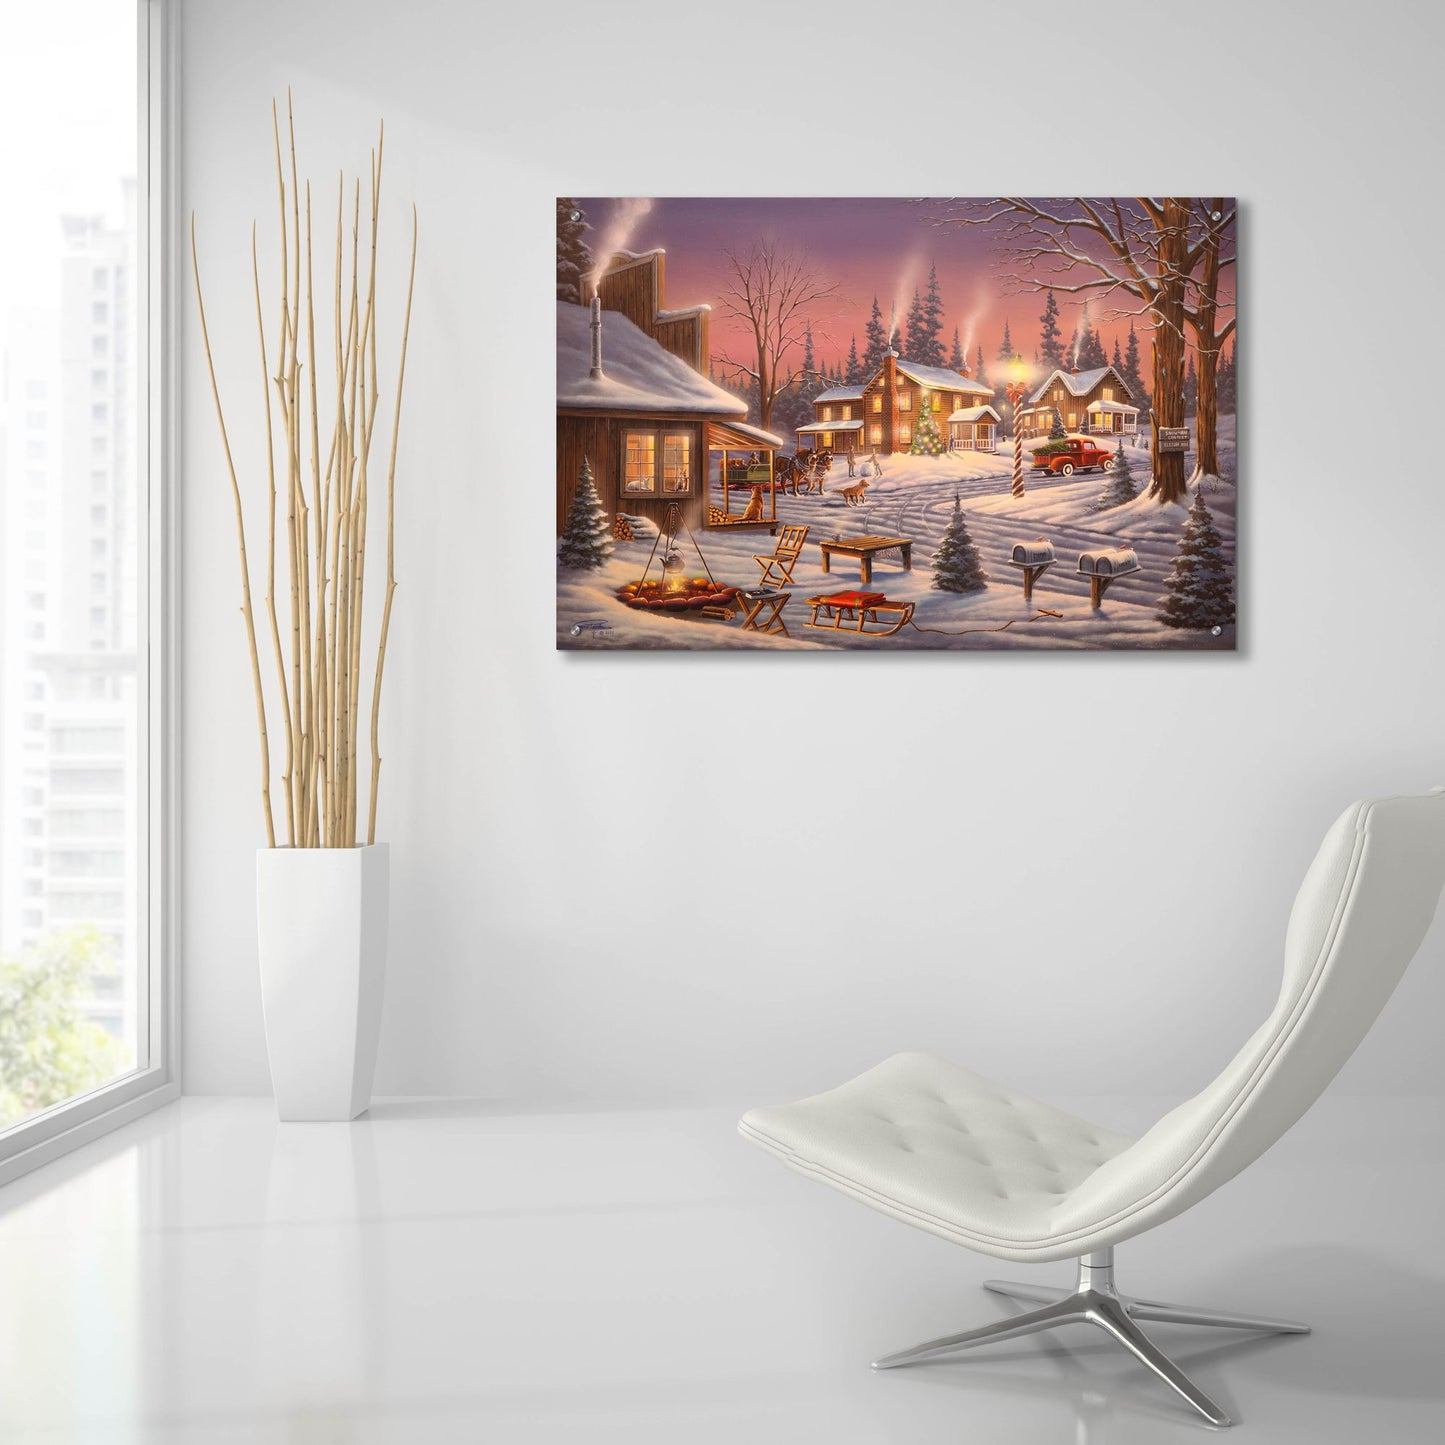 Epic Art 'Holiday Festivities' by Geno Peoples, Acrylic Glass Wall Art,36x24